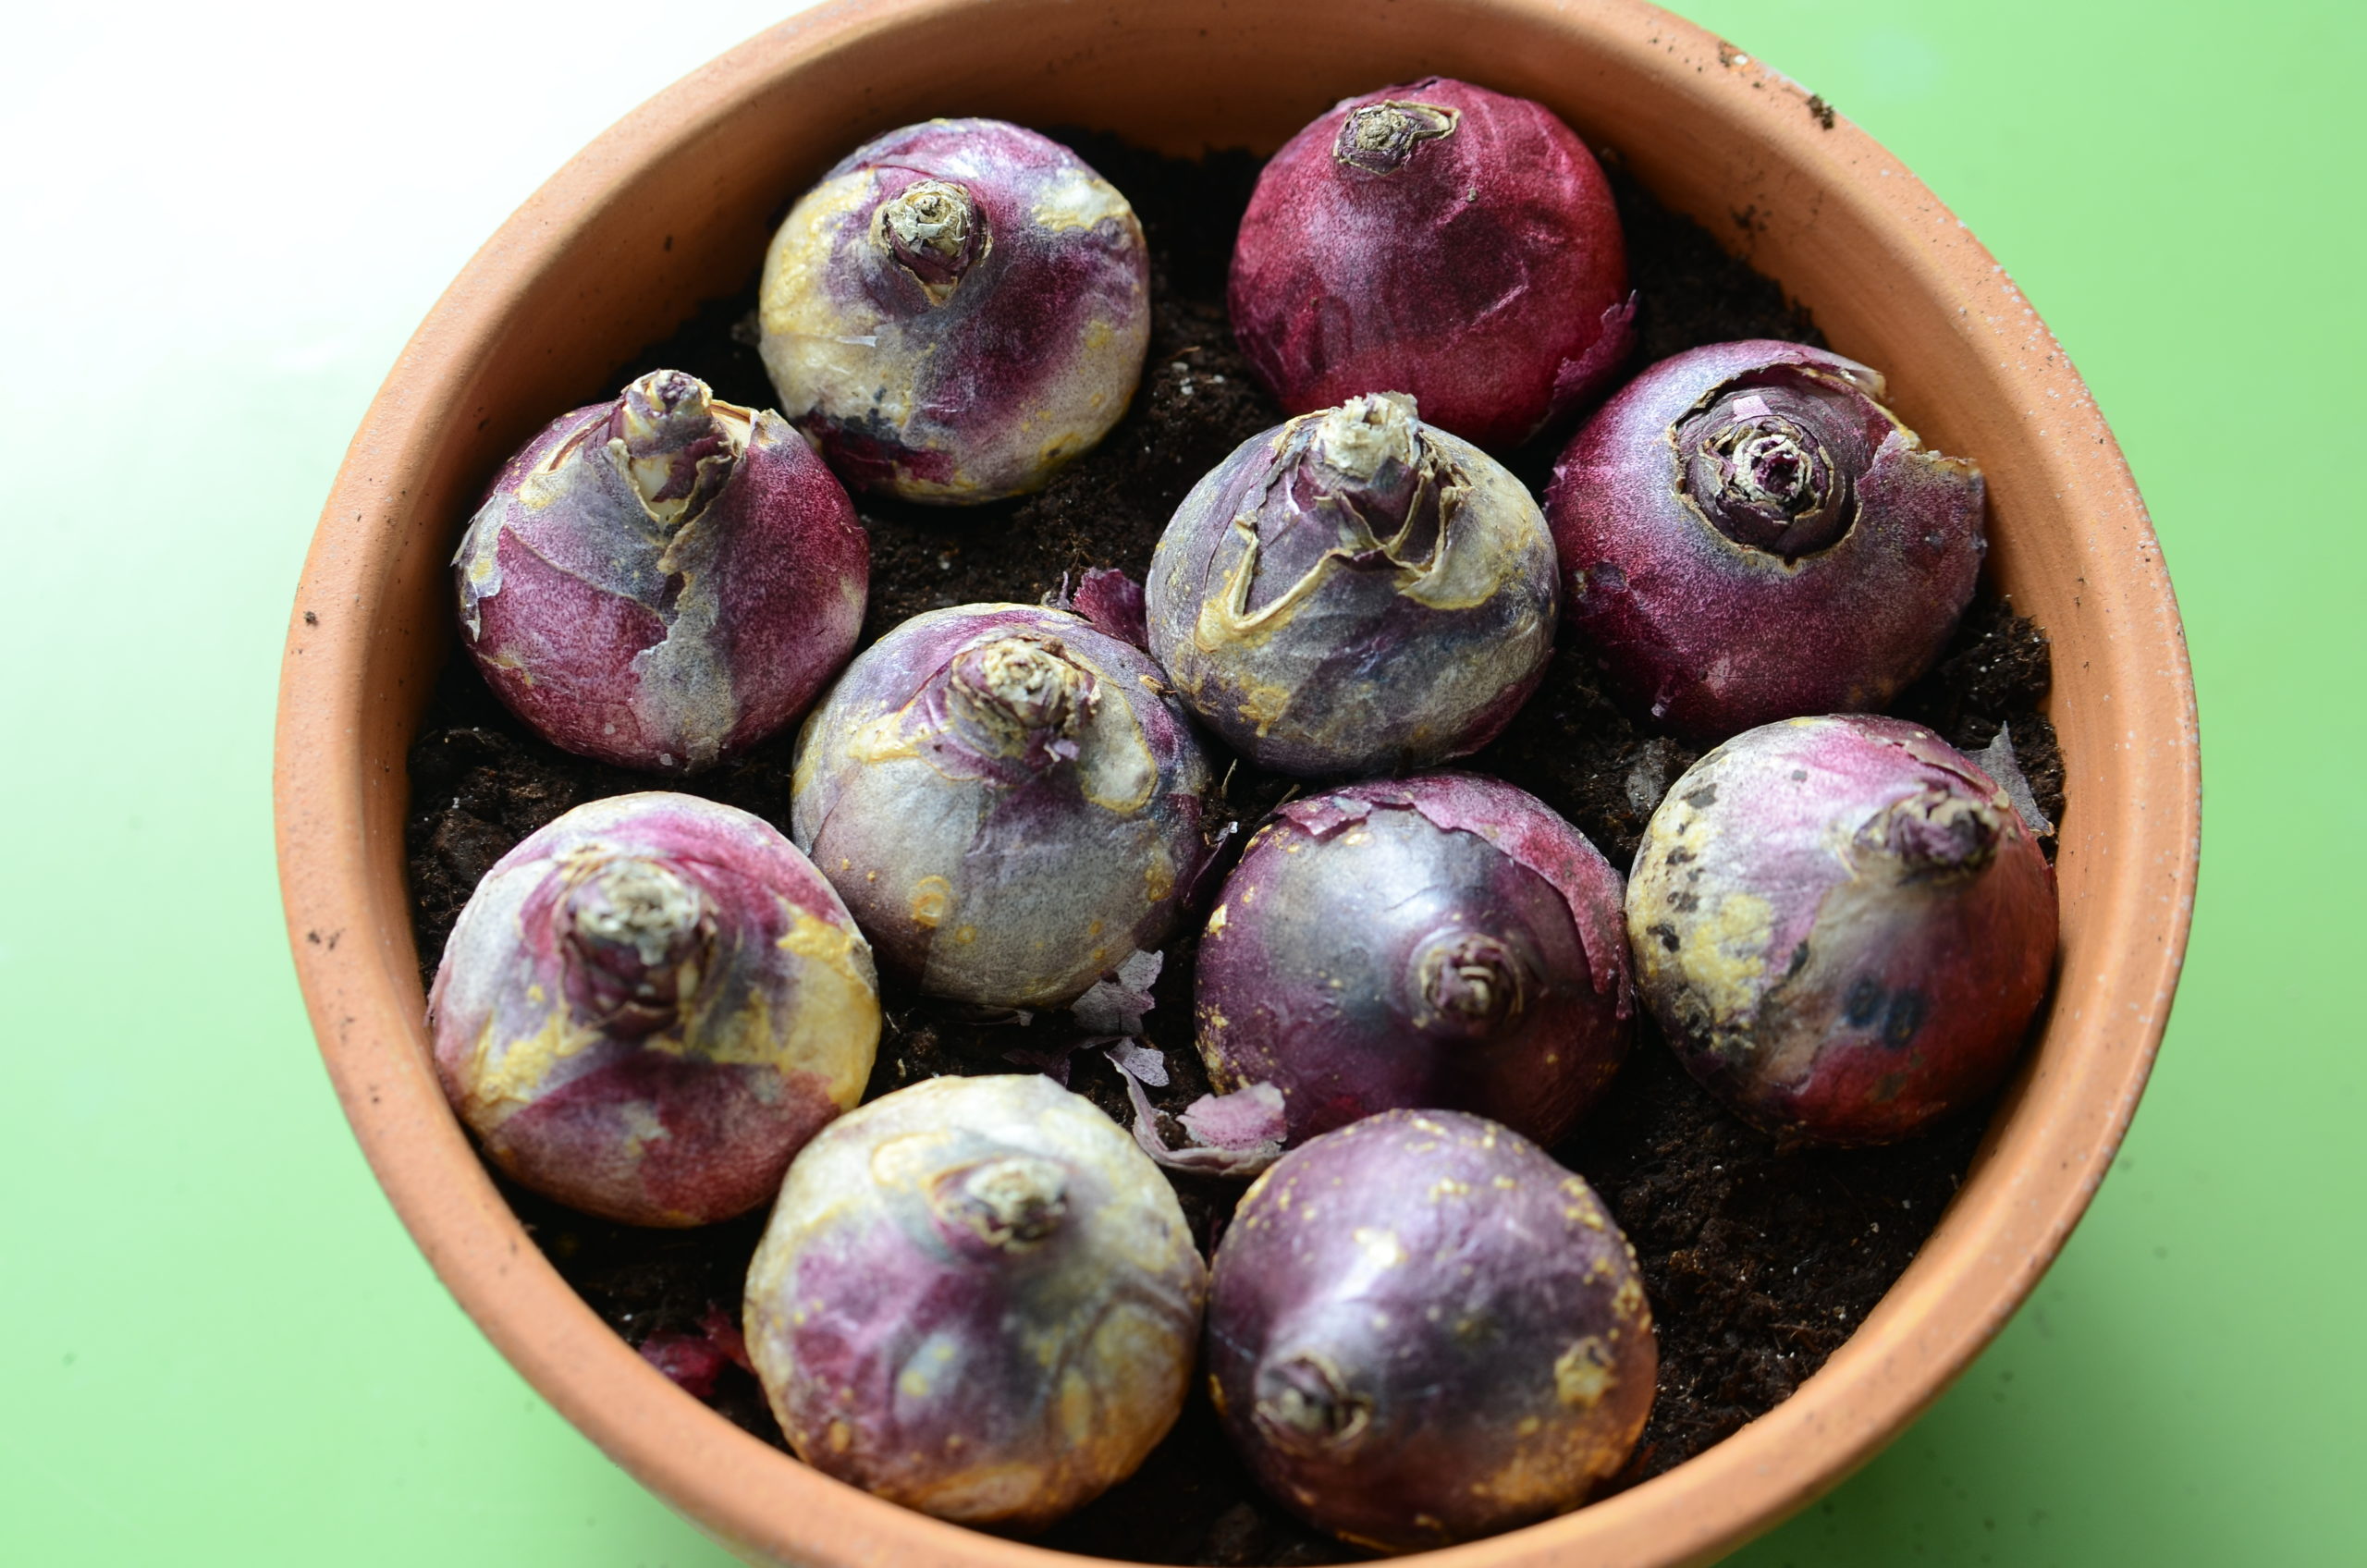 Eleven hyacinth bulbs have been set on the soil in a 10-inch bulb pan. No matter what bulb is planted, the 